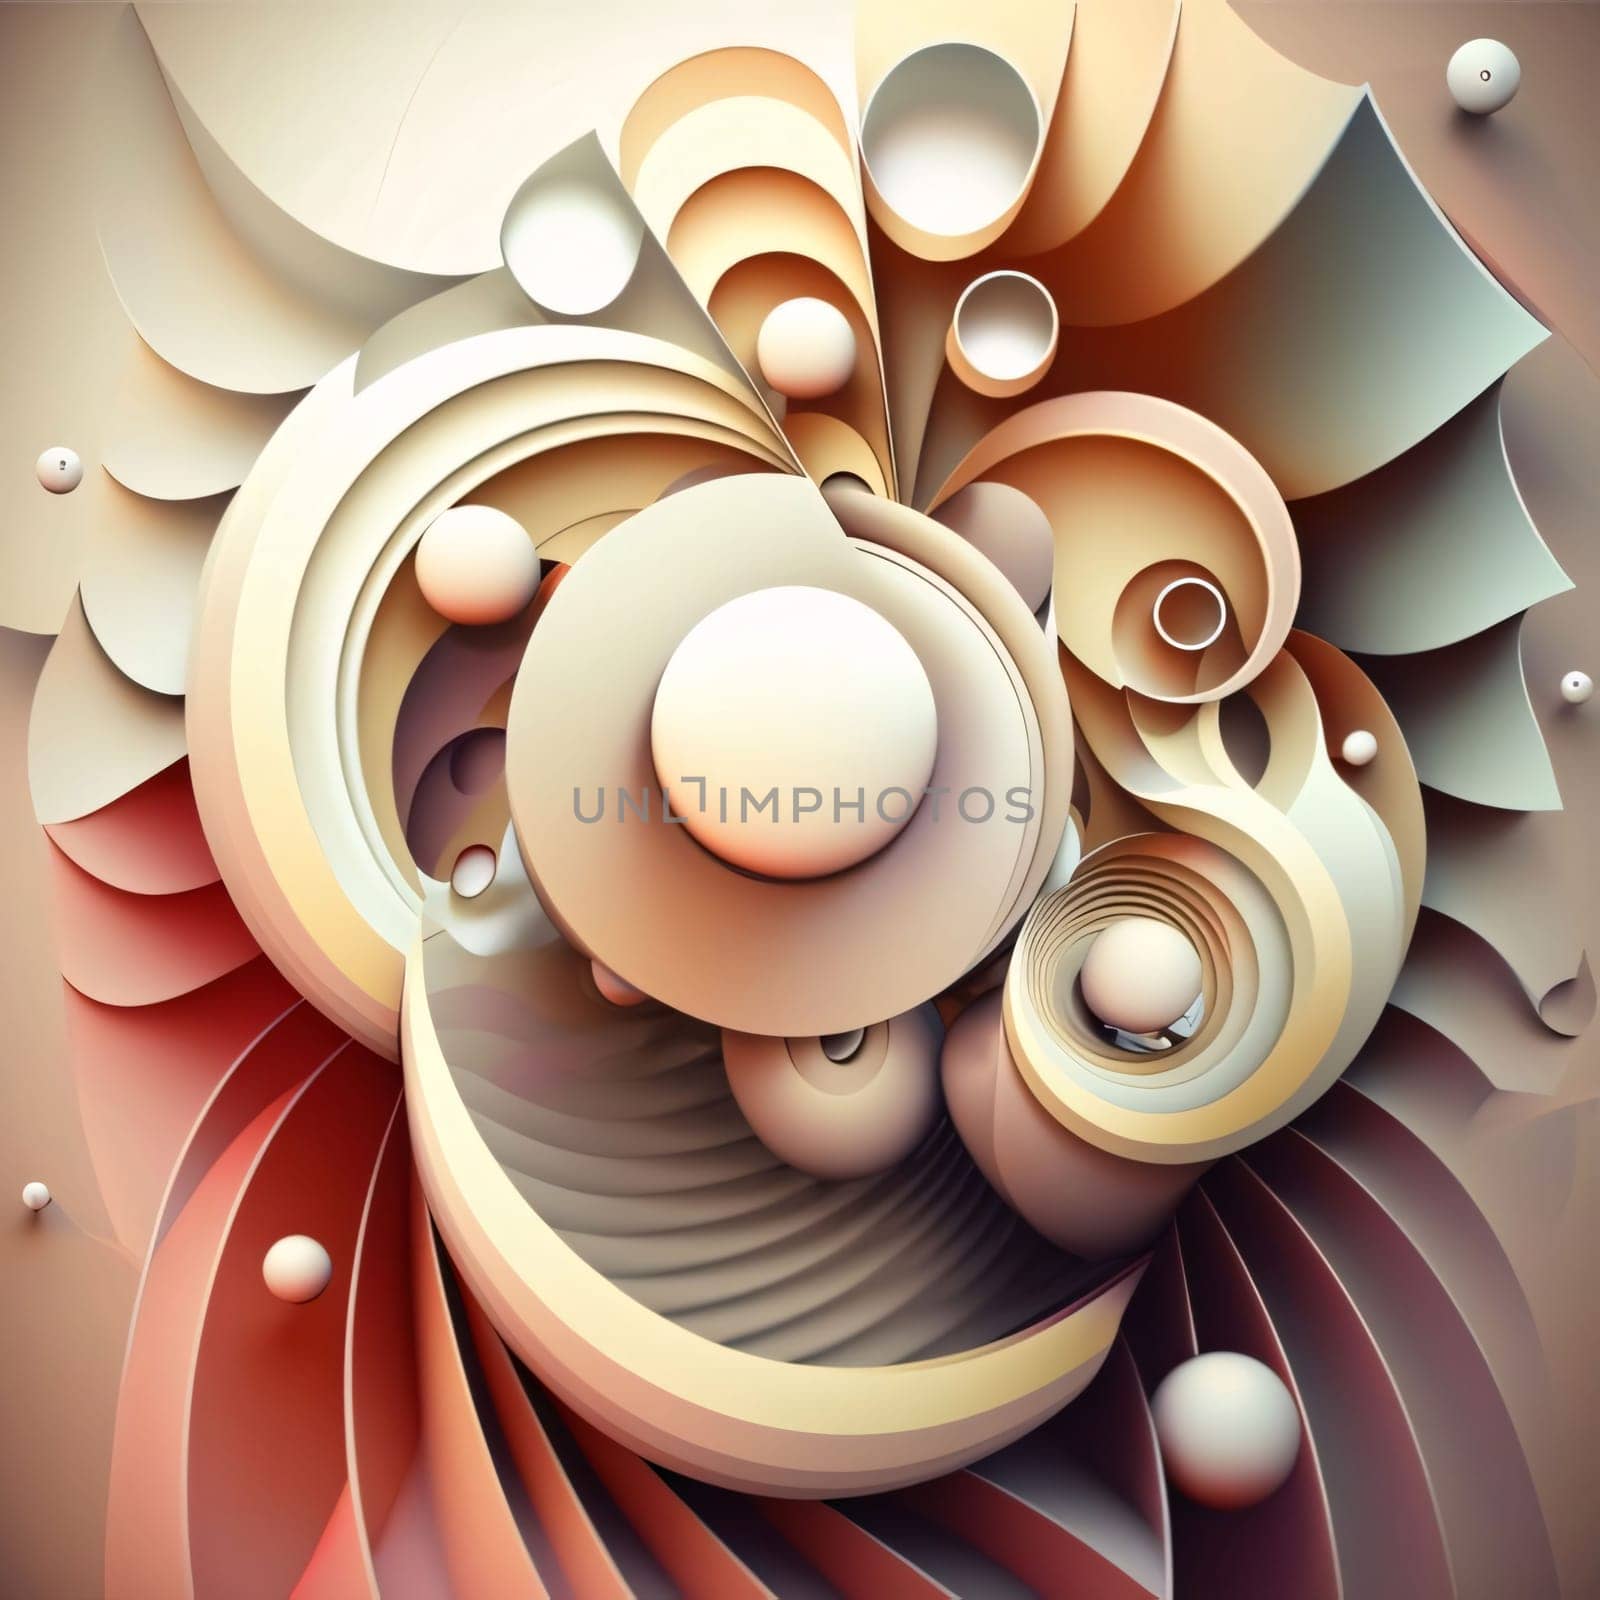 Abstract background design: 3d illustration of abstract geometric composition,digital artwork for creative graphic design